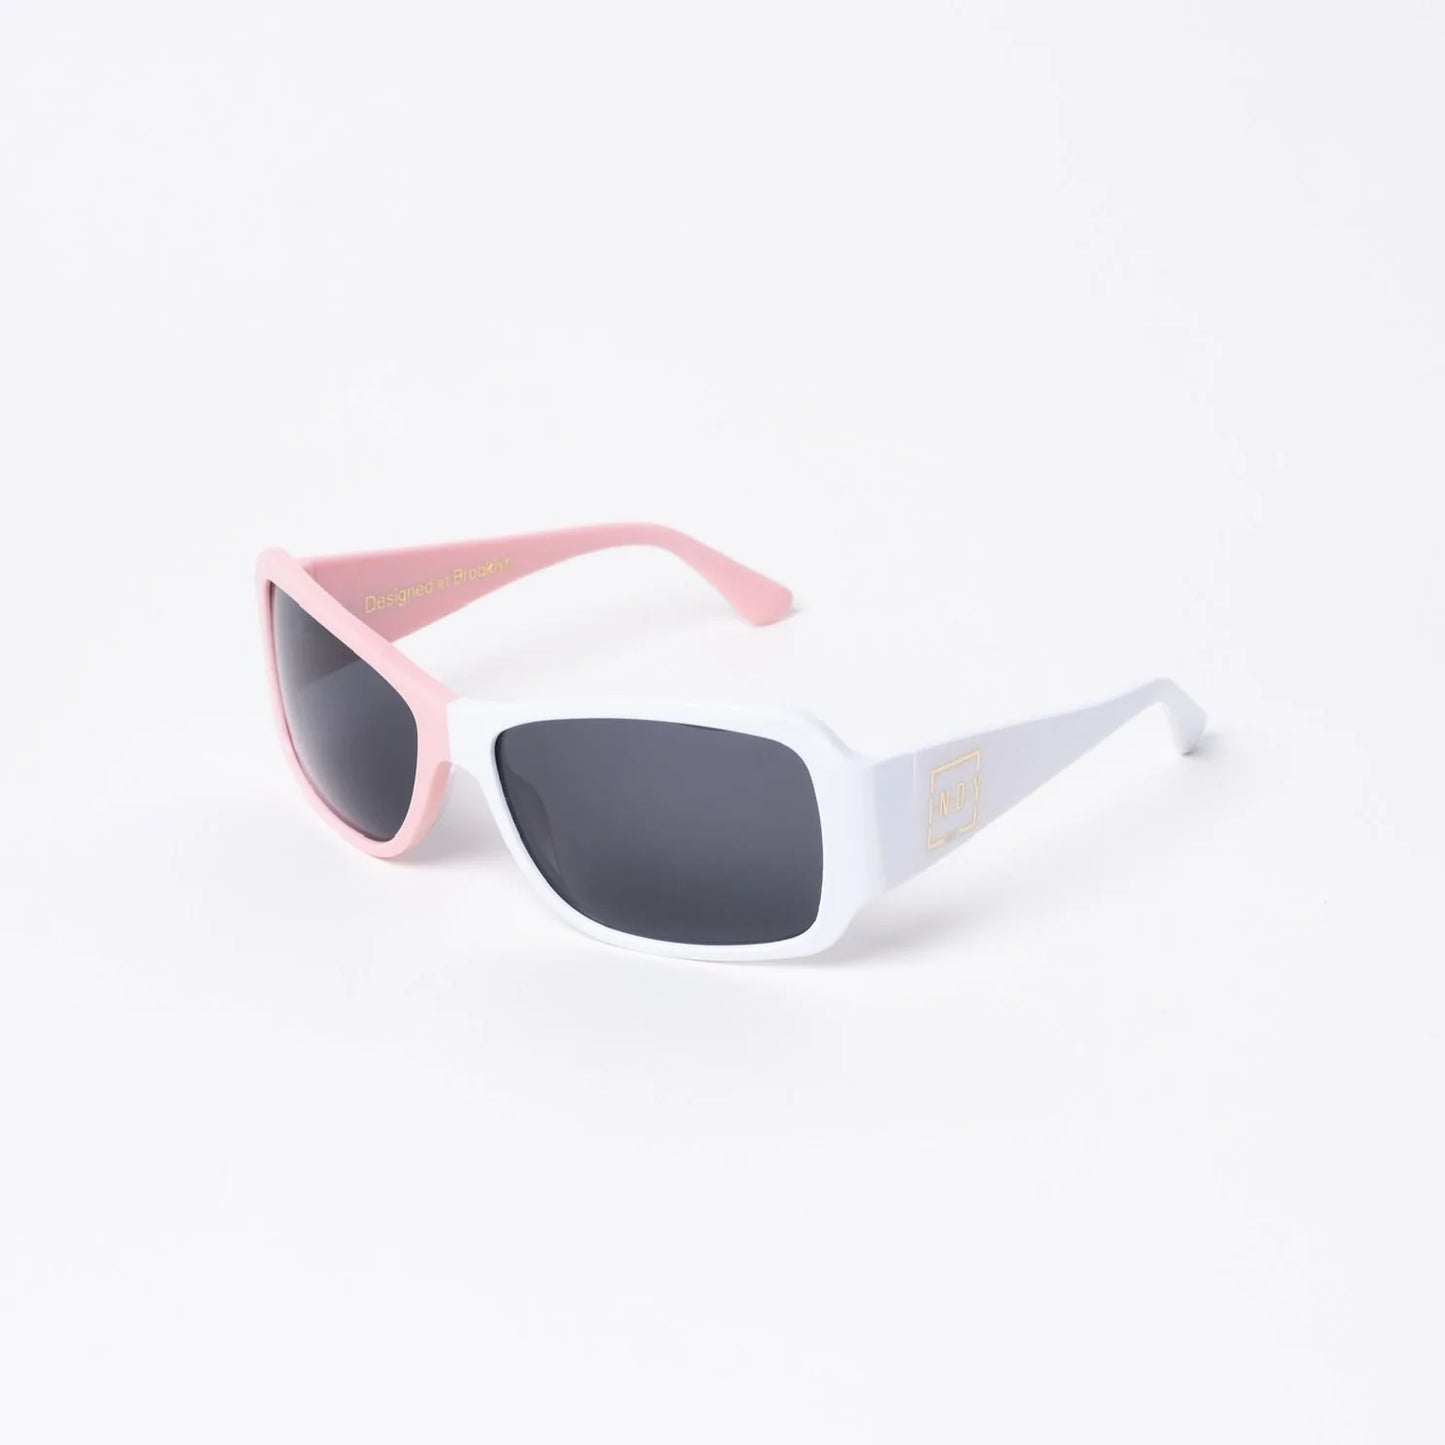 INDY Maui Sunglasses in Pink + White